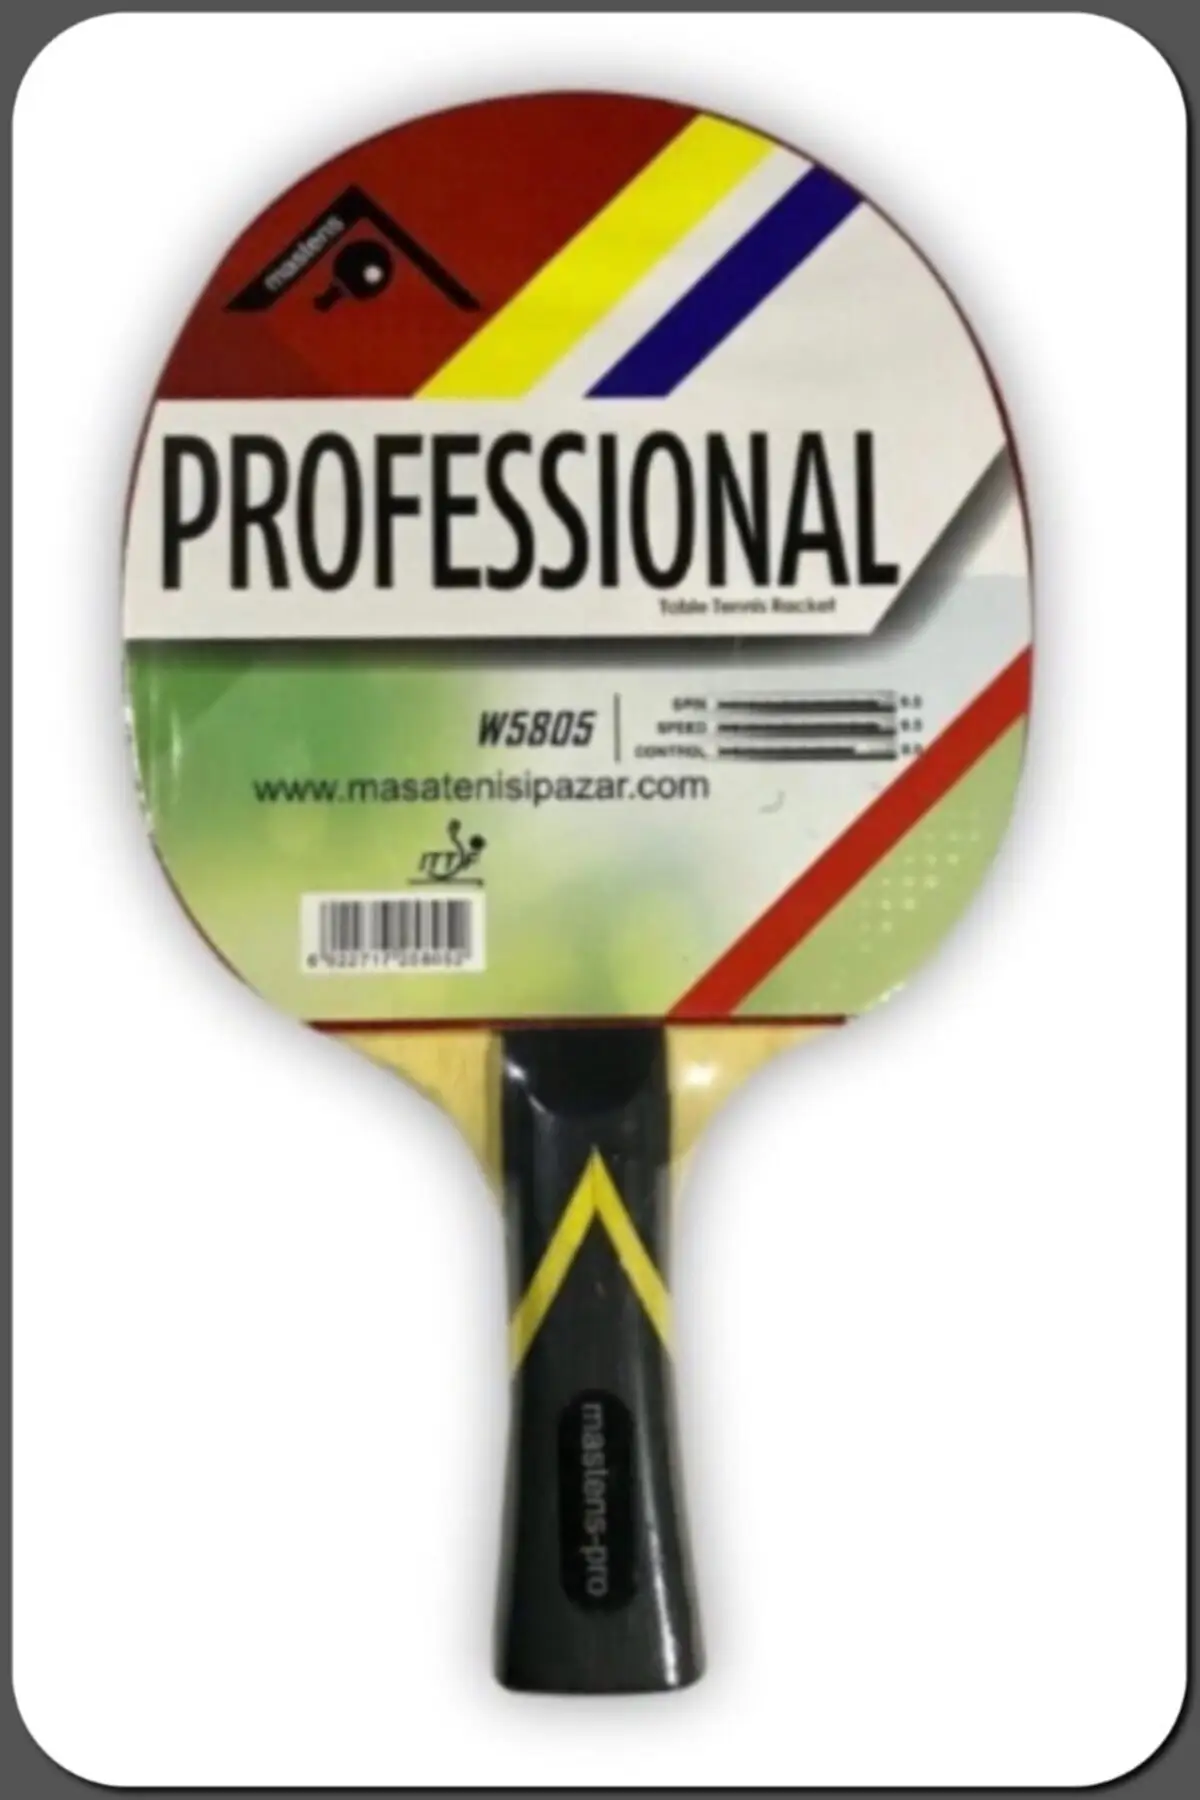 Pro Ittf Approved Professional Table Tennis Racket Tennis Equipment & Accessory Outdoor